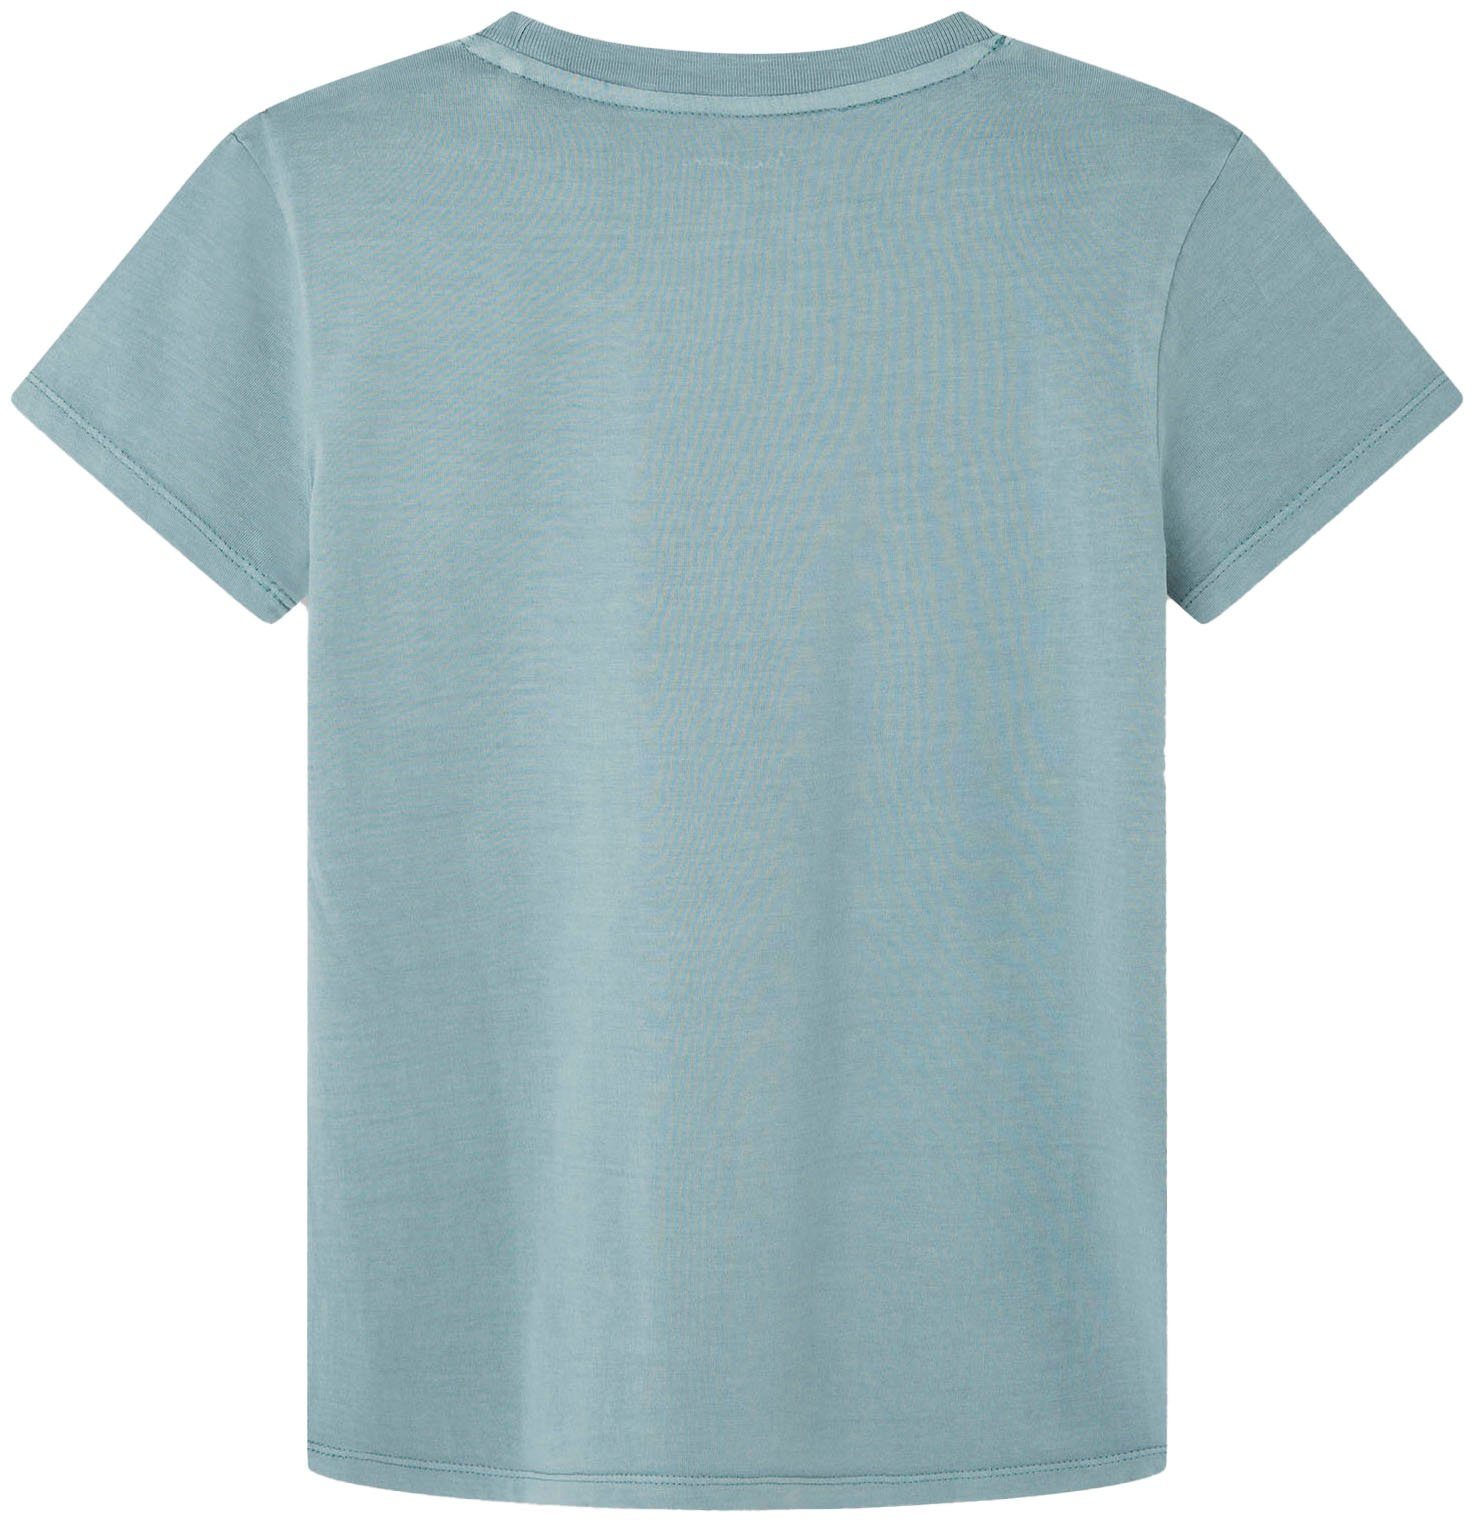 Pepe Jeans T-shirt for boys